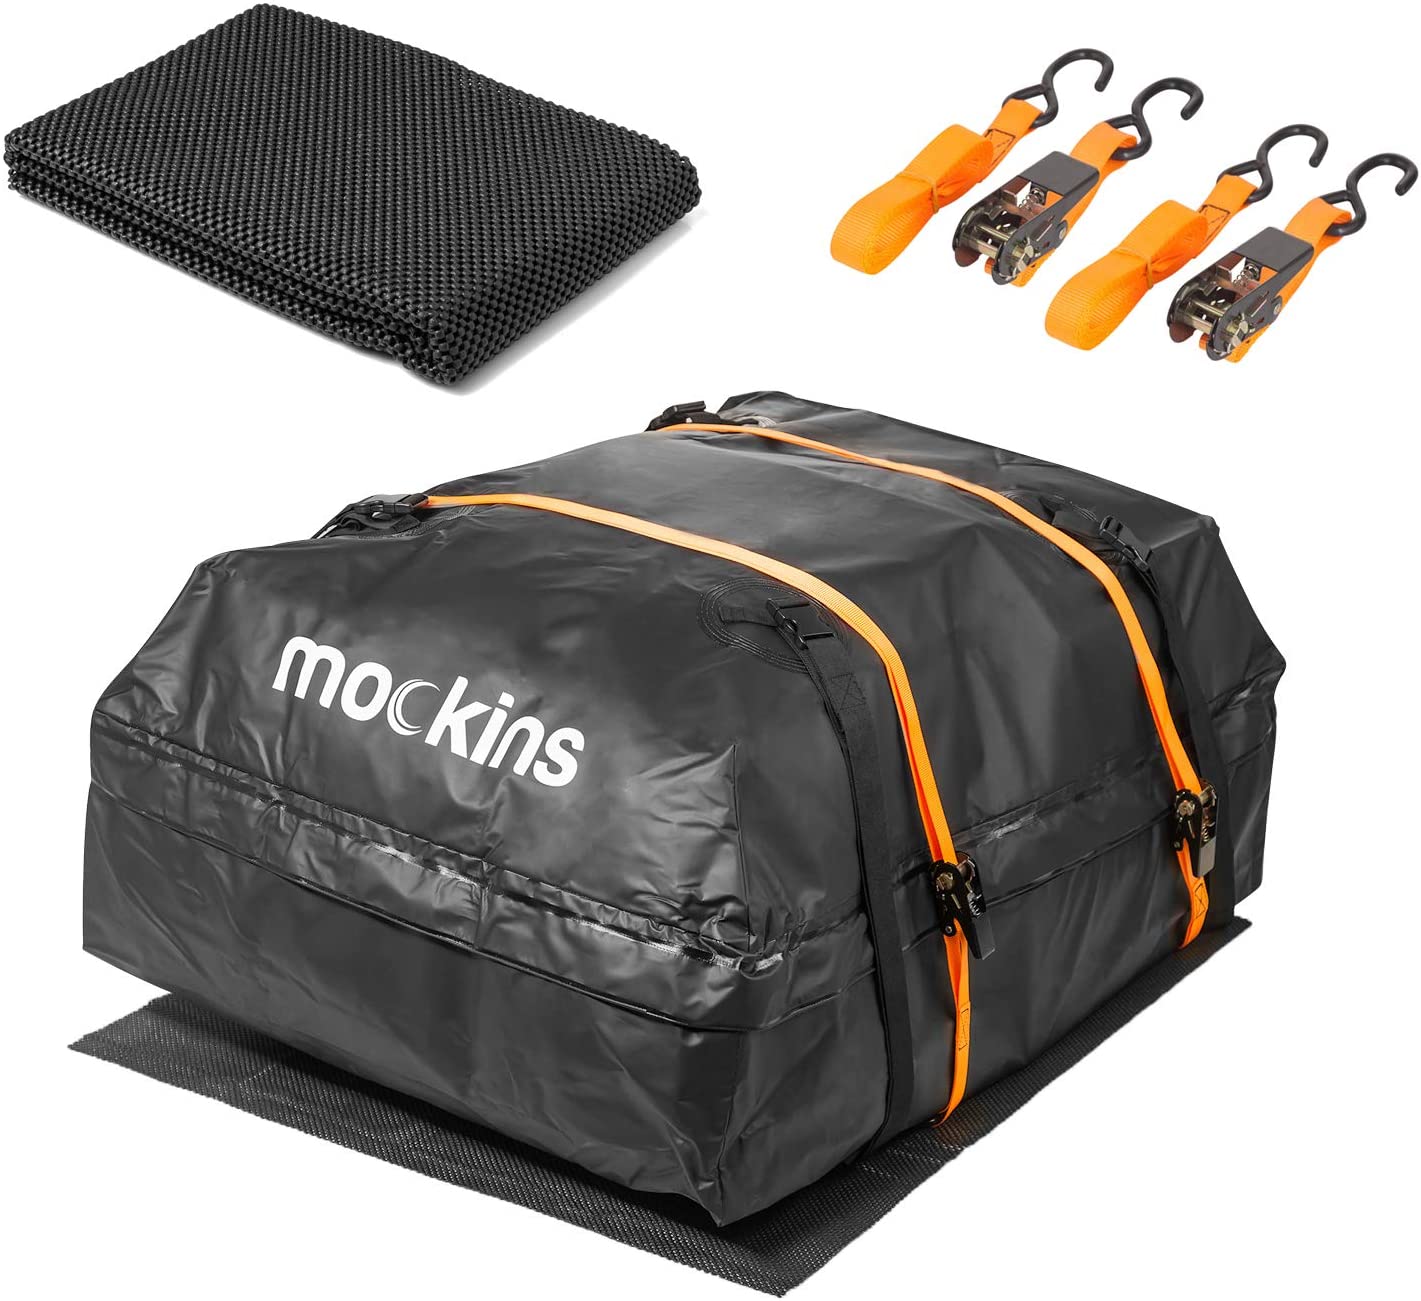 mockins Waterproof Cargo Roof Bag Set With Protective Car Roof Mat And 2 Ratchet Straps | 44